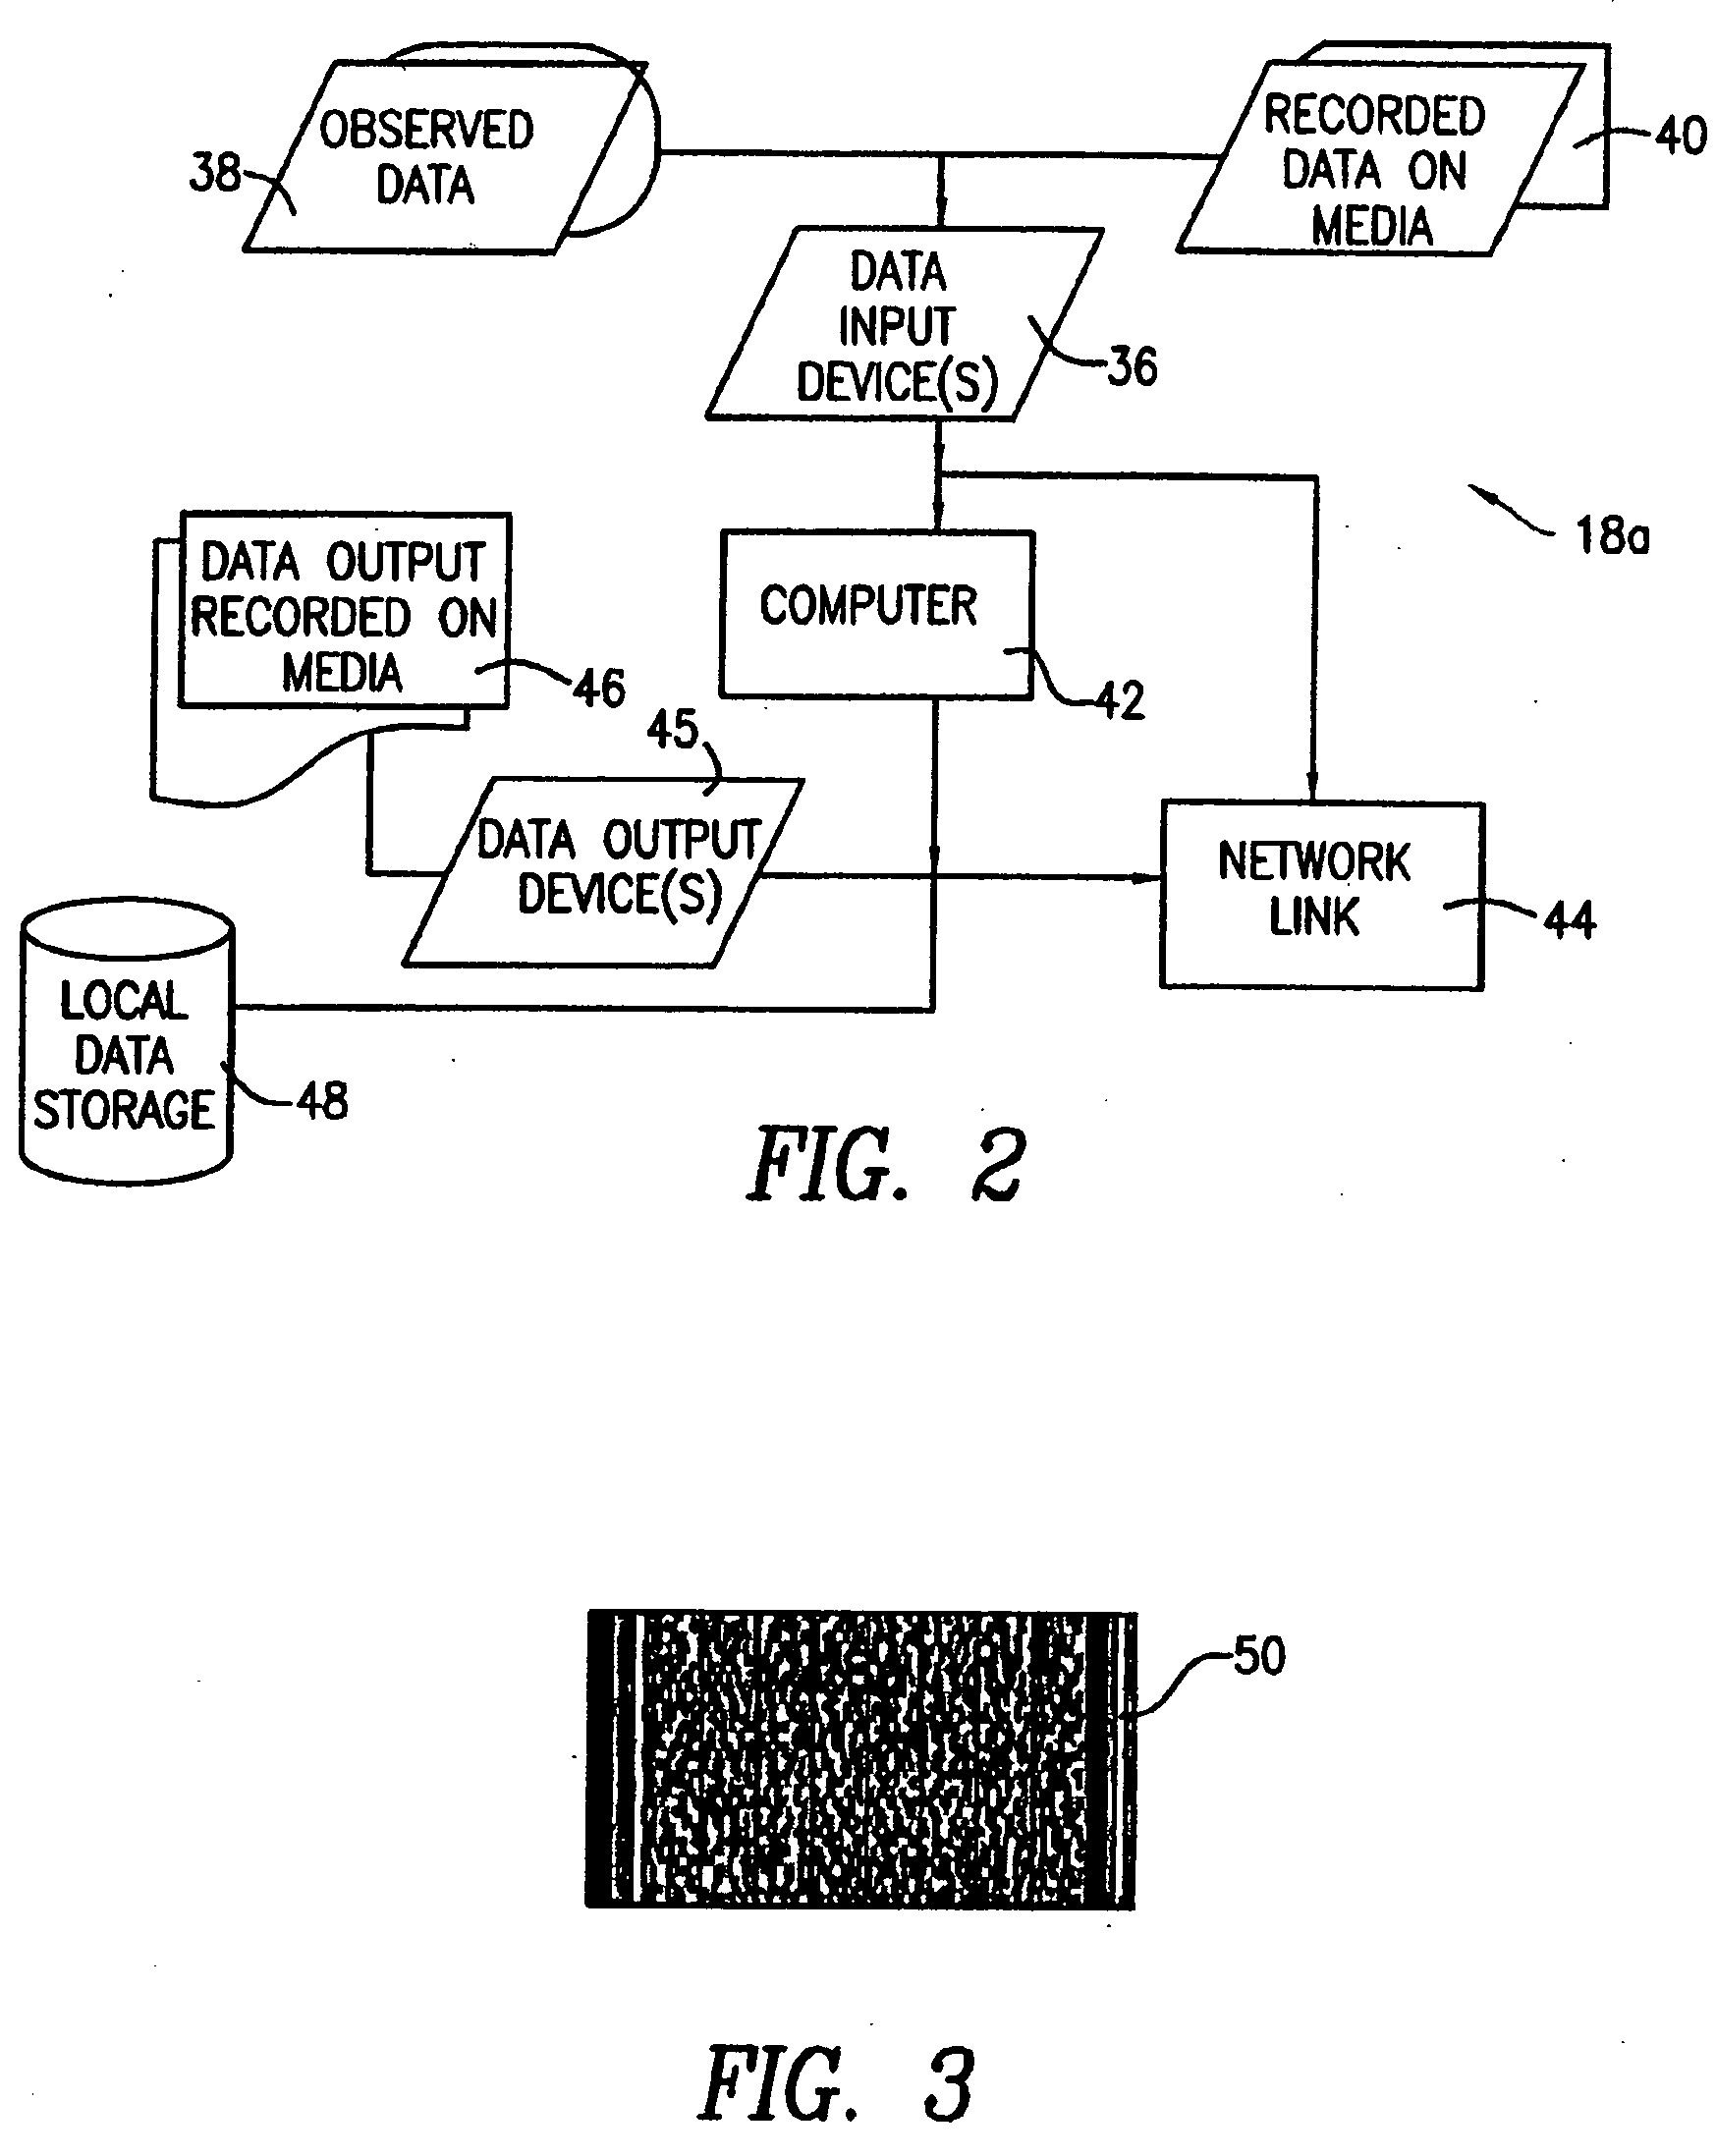 System and method for site-specific electronic record keeping